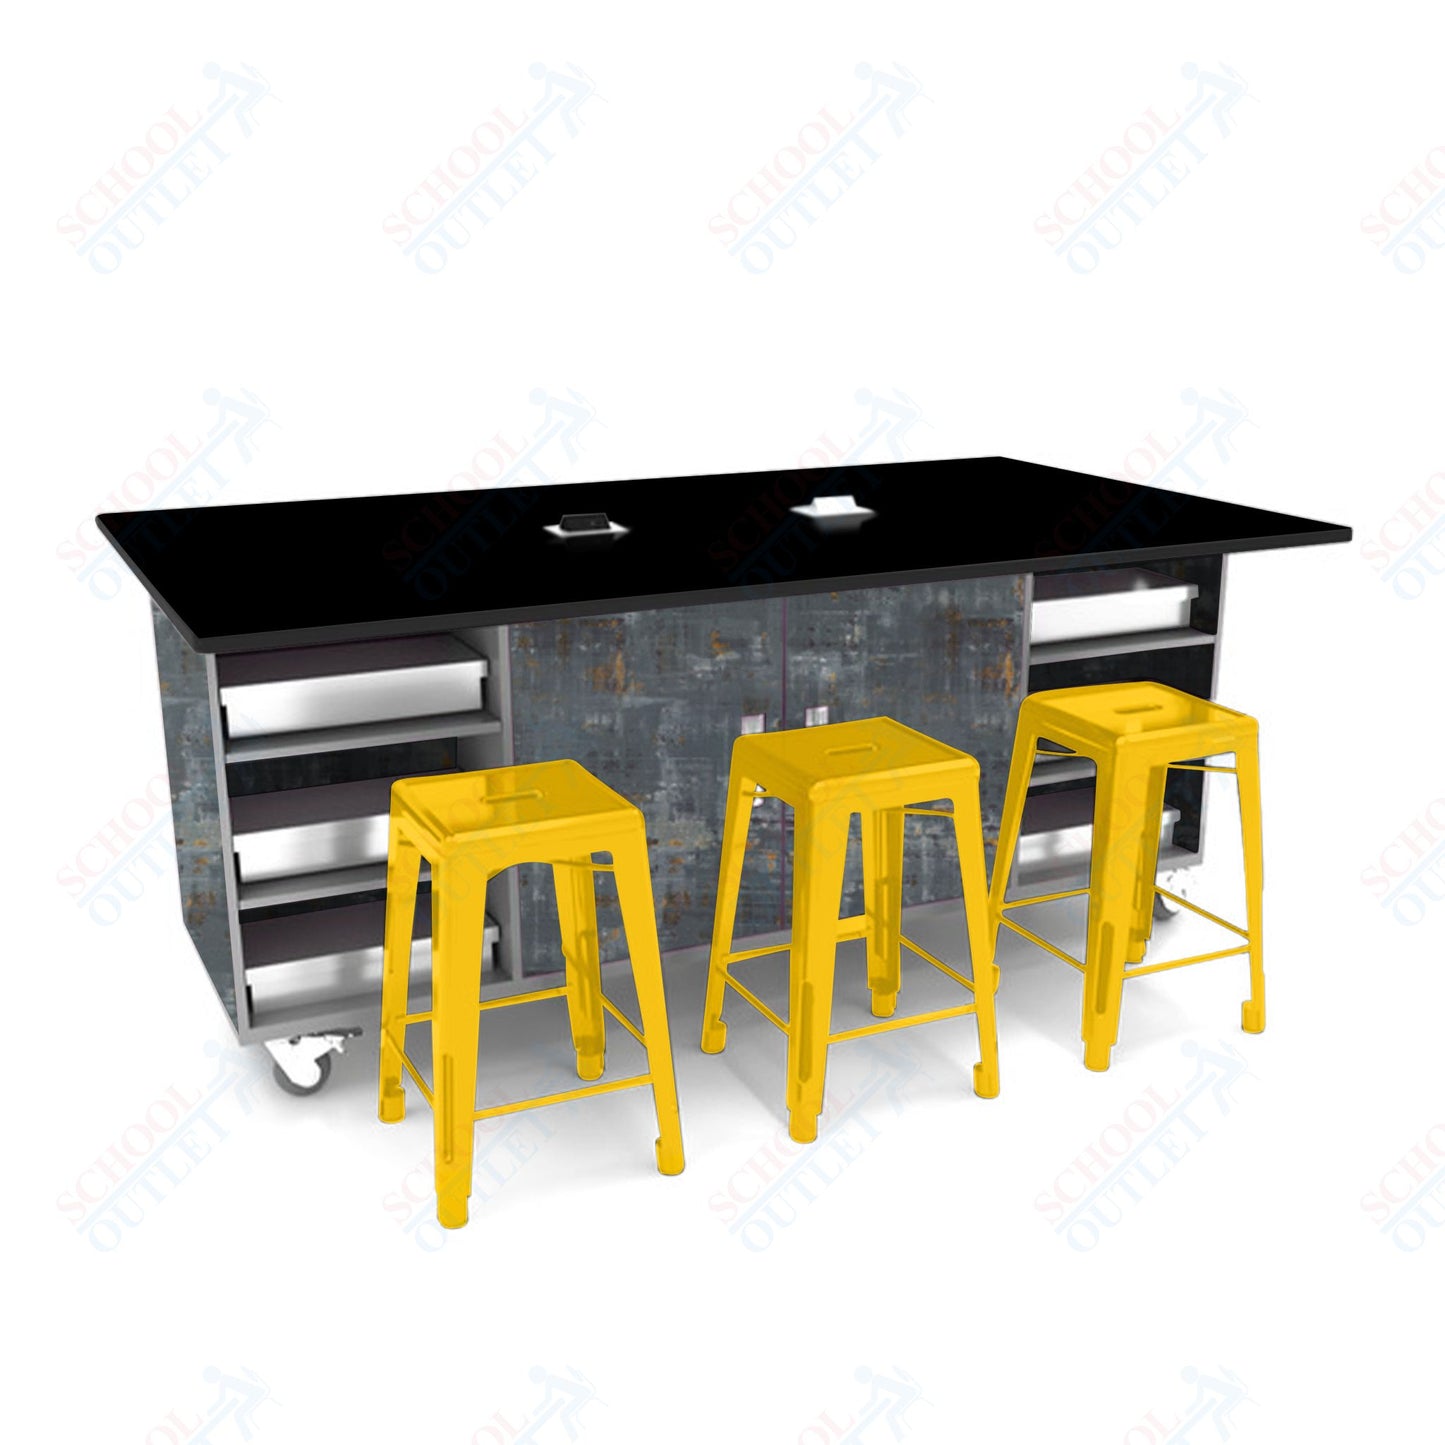 CEF ED Double Table 42"H Tough Top, Laminate Base with  6 Stools, Storage bins, and Electrical Outlets Included.